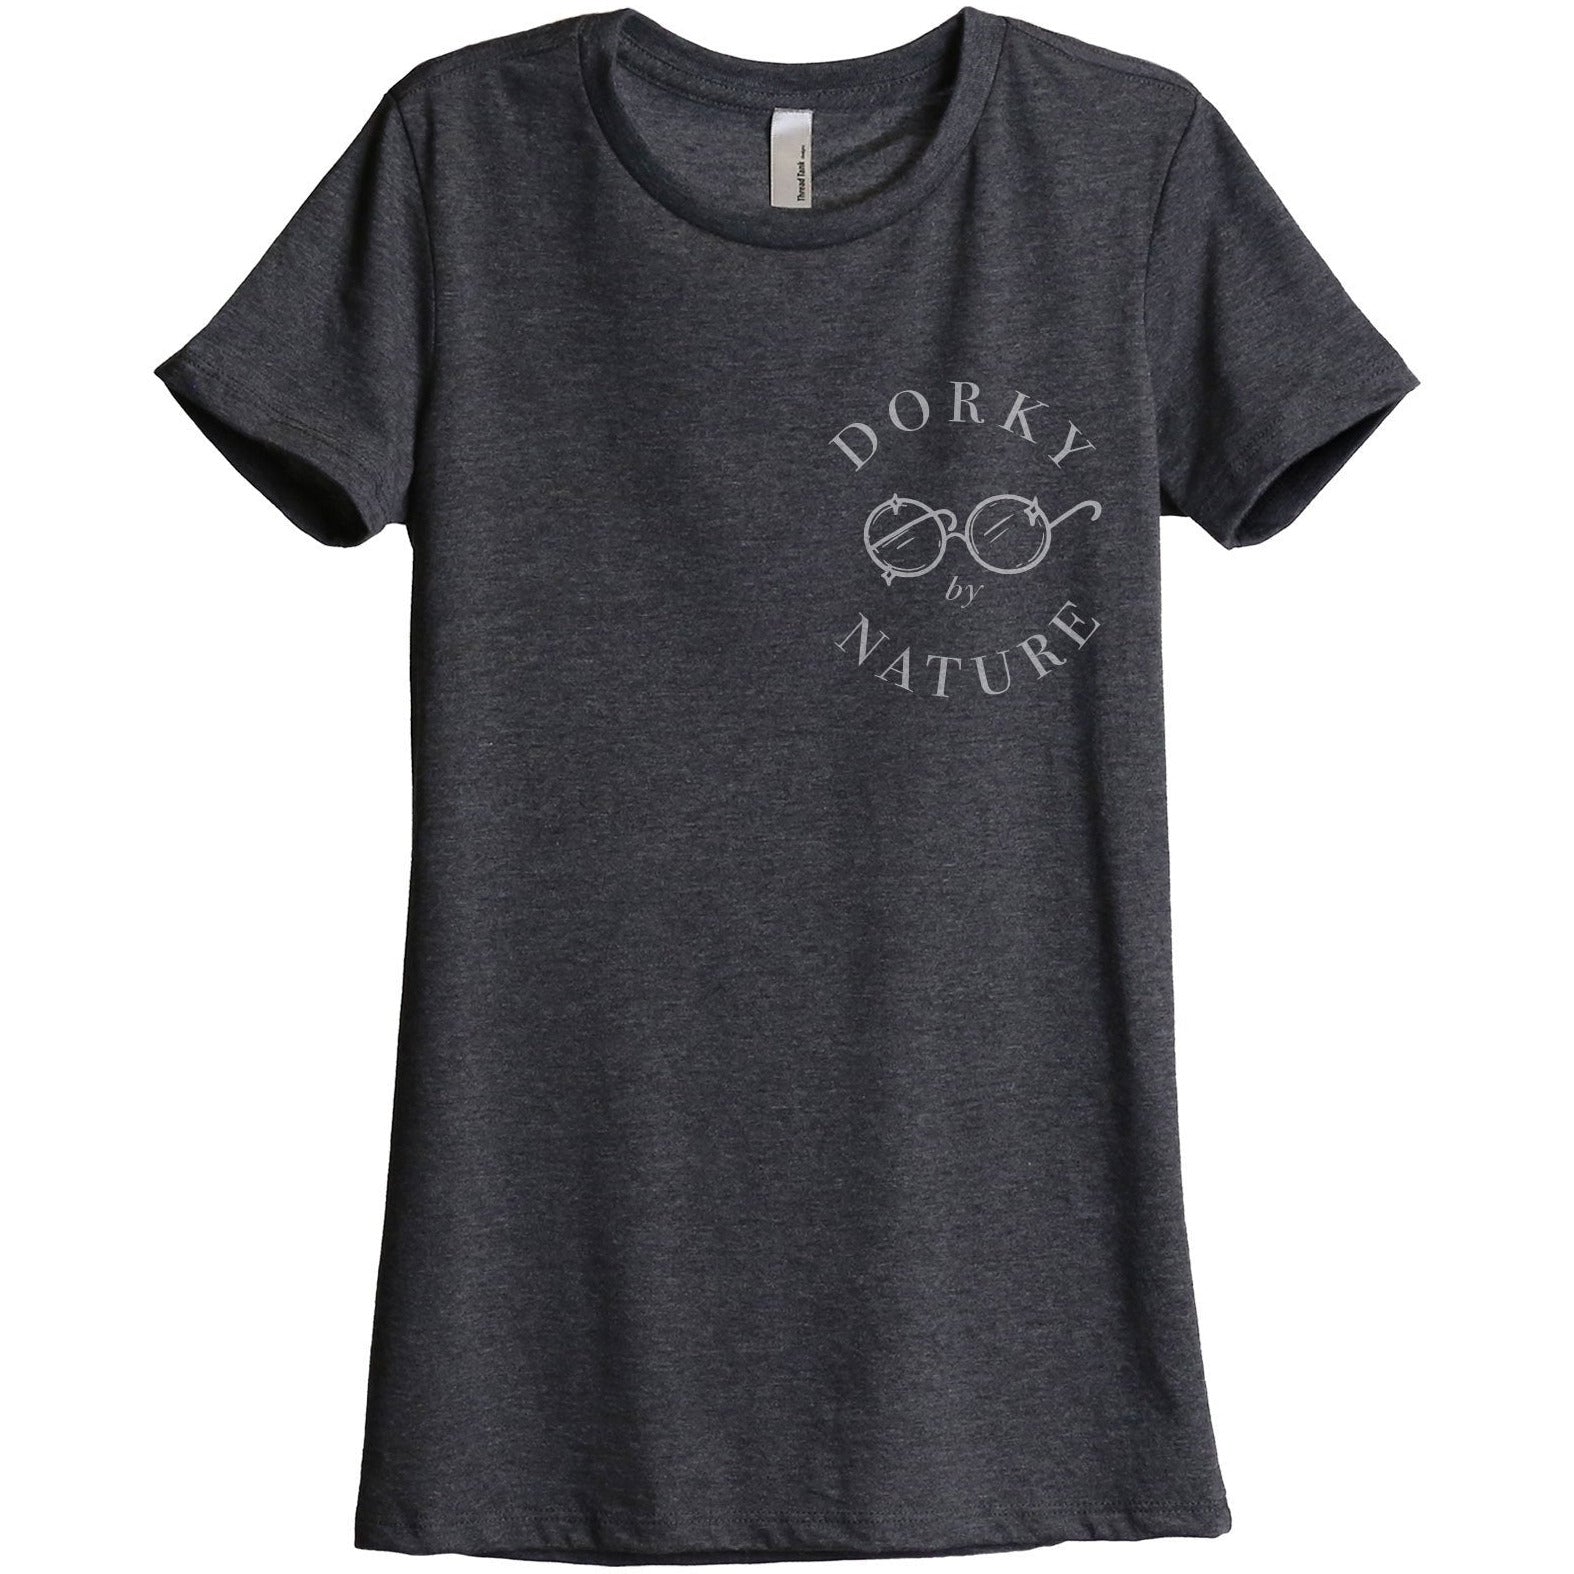 Dorky By Nature Women's Relaxed Crewneck T-Shirt Top Tee Charcoal Grey
